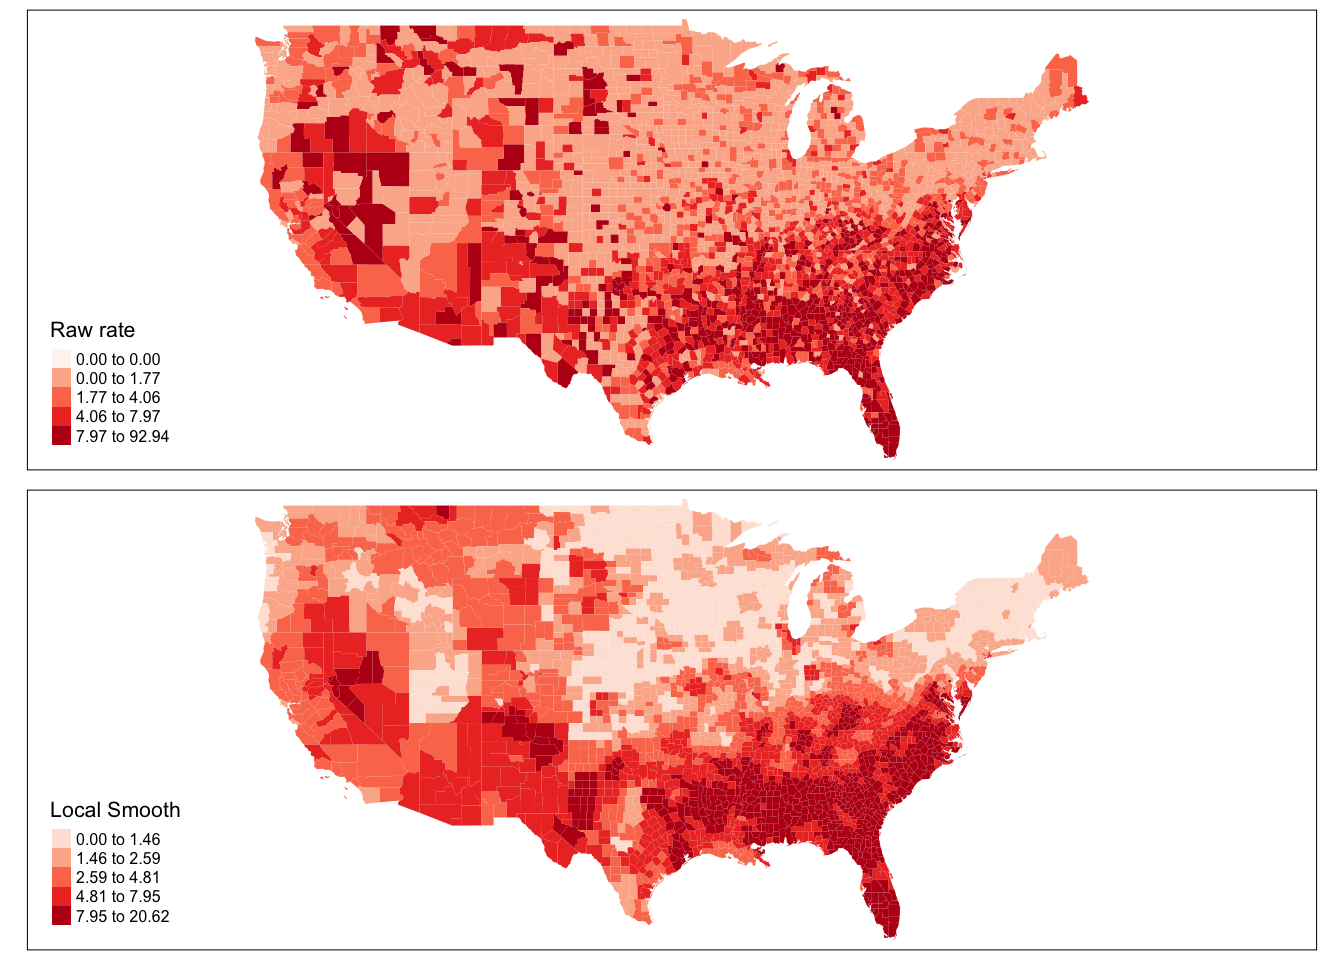 Two shaded maps of counties in the United States. Both maps use five shades of red, getting darker to represent higher values, the first one corresponding to 'Raw rate', the second to 'Local Smooth', according to their legends. The first map is more blotchy than the second, with some lighter counties amidst darker red ones, and vice versa. The second map has much clearer contiguous blocks sharing the same colour. In both maps, the southeast has the most concentration of dark red, with some patches in the south and southwest.